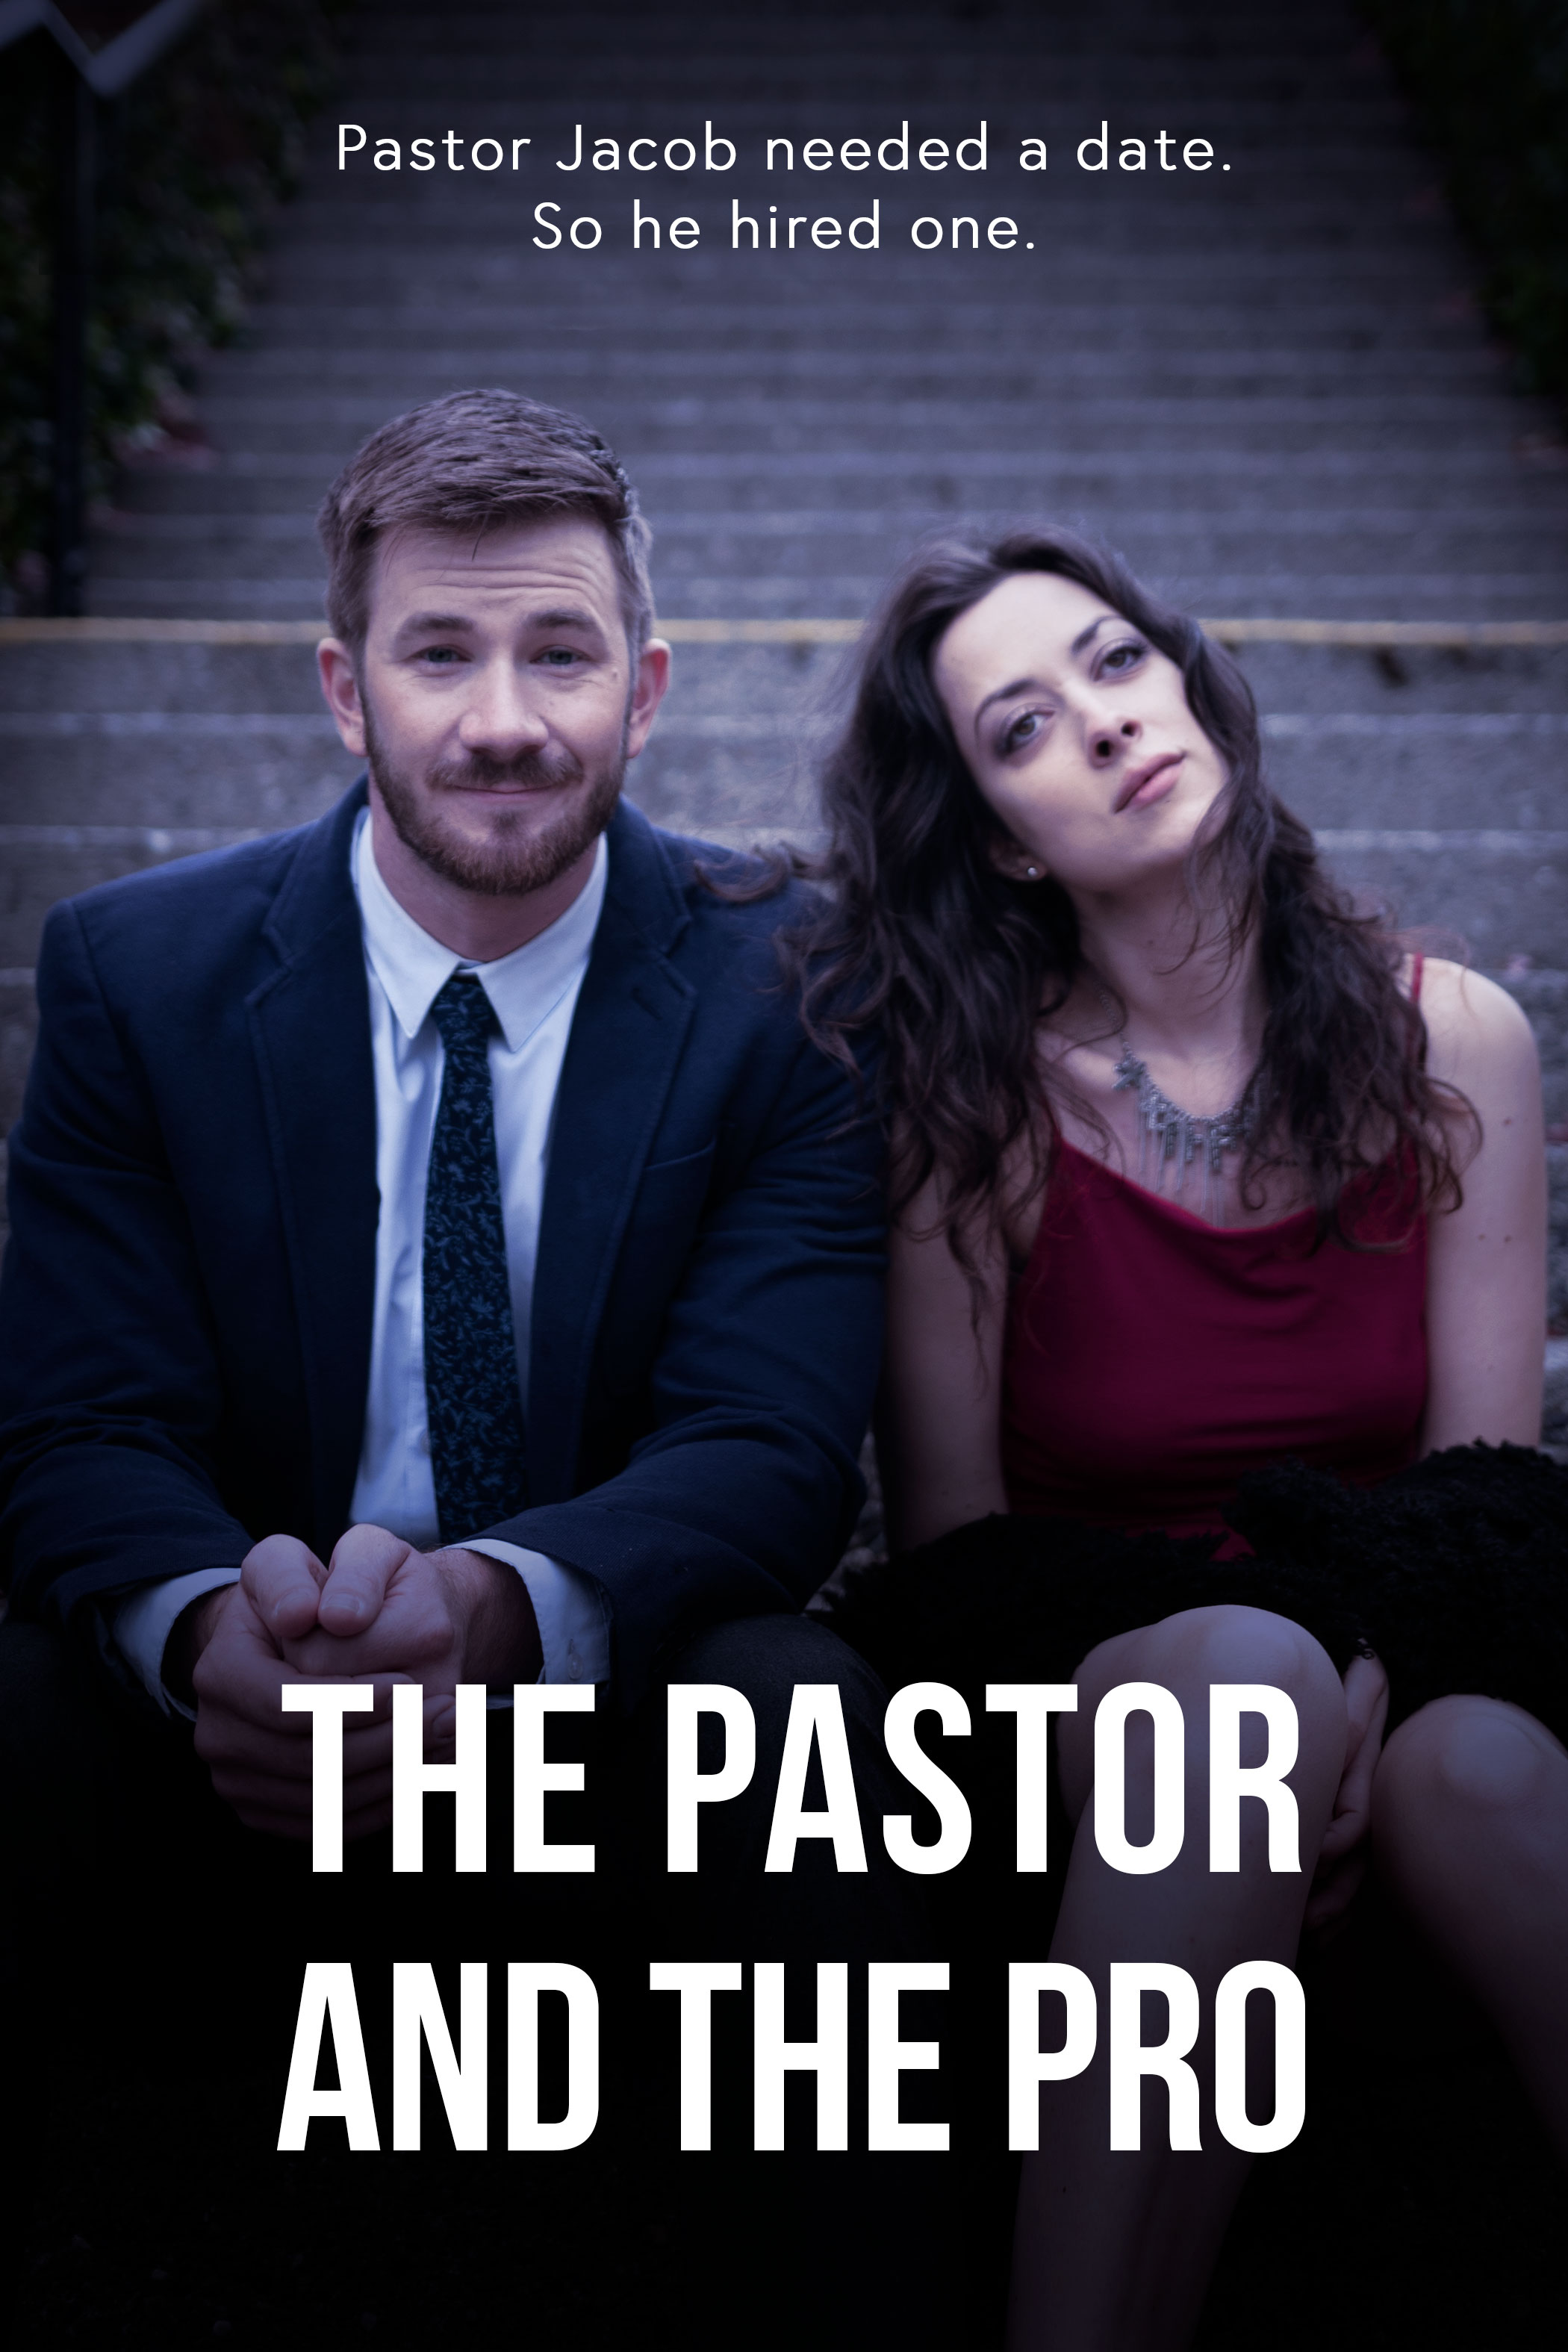 The Pastor and the Pro (2018)